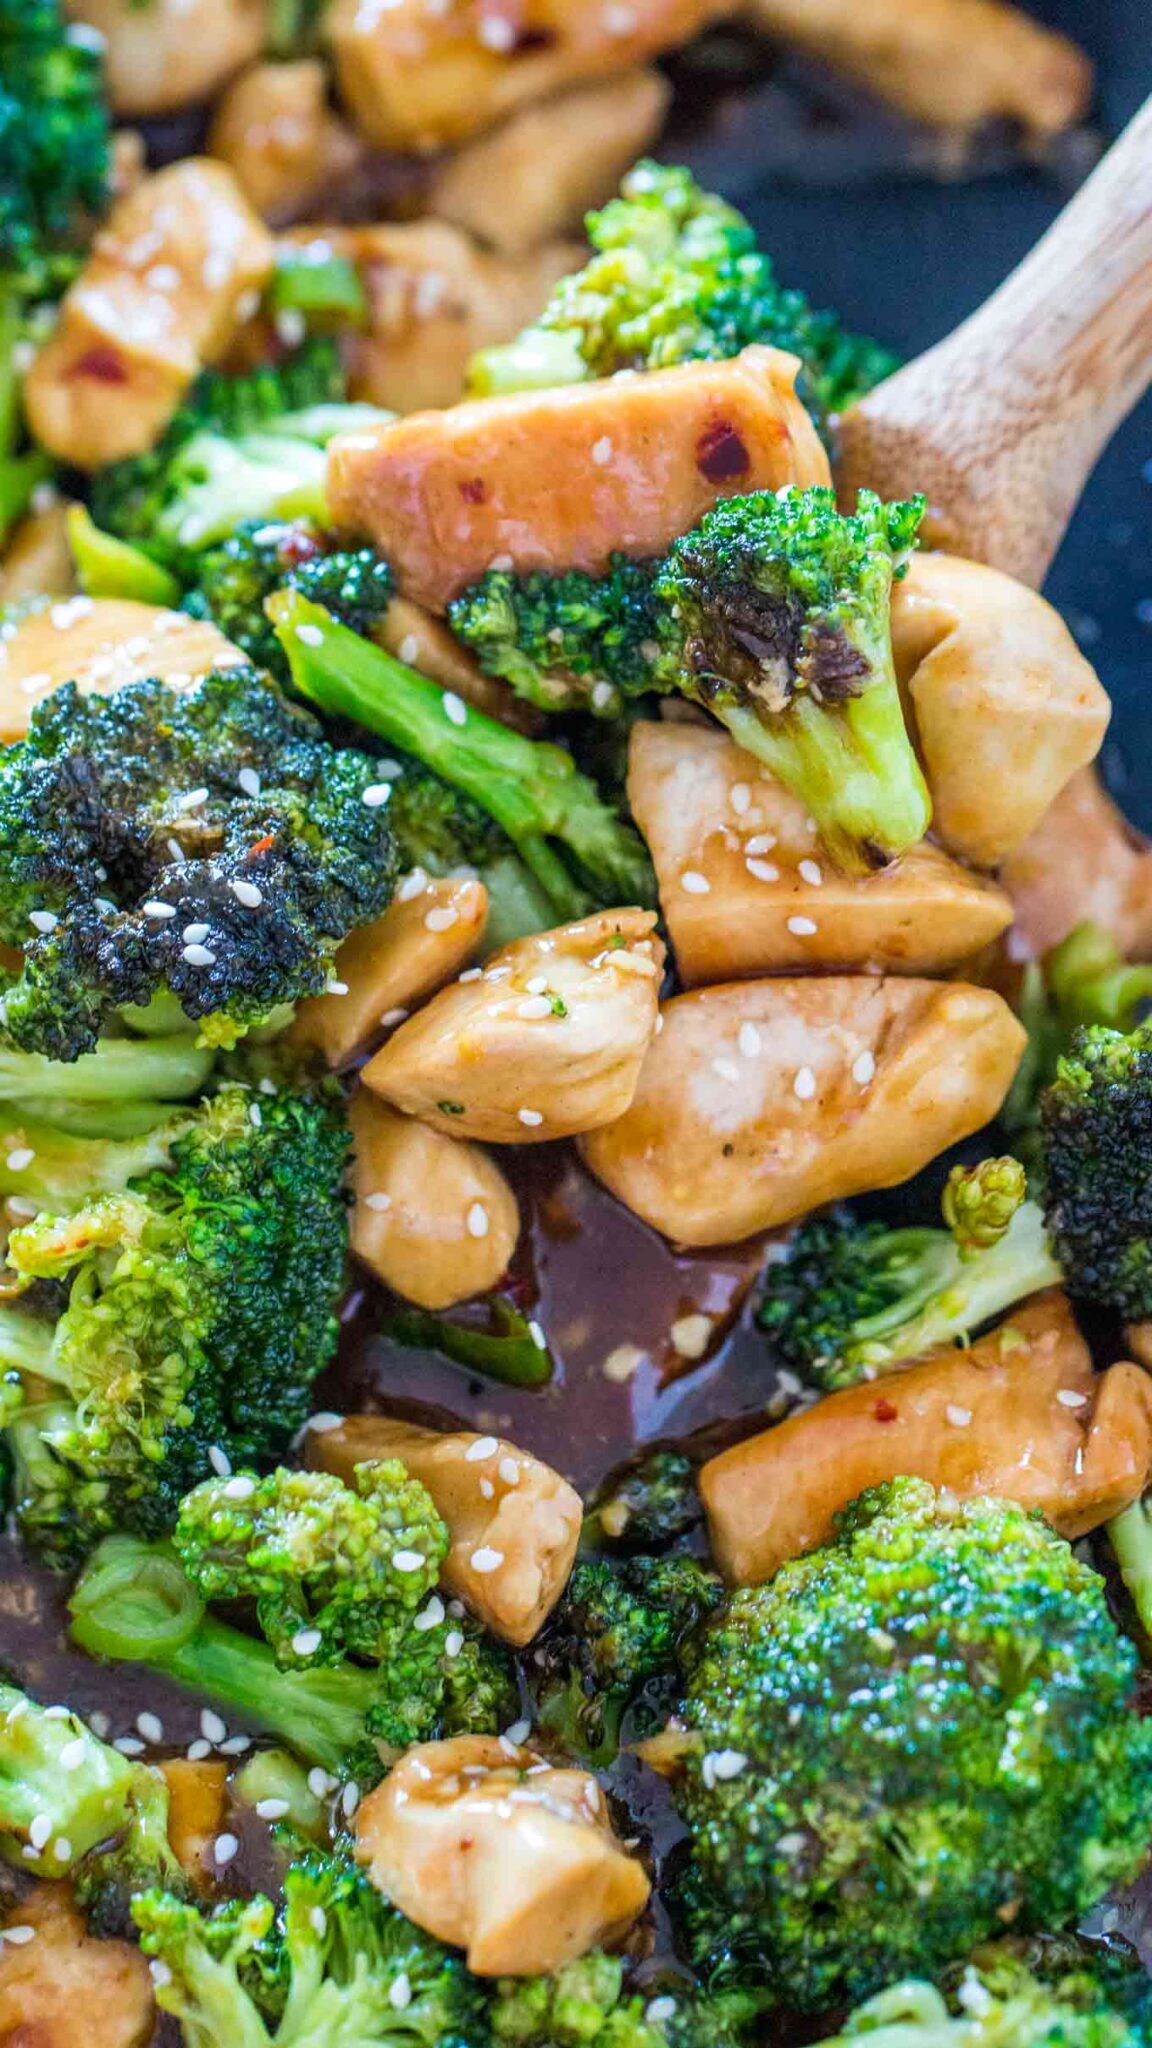 Chicken and Broccoli Stir Fry [Video] - Sweet and Savory Meals